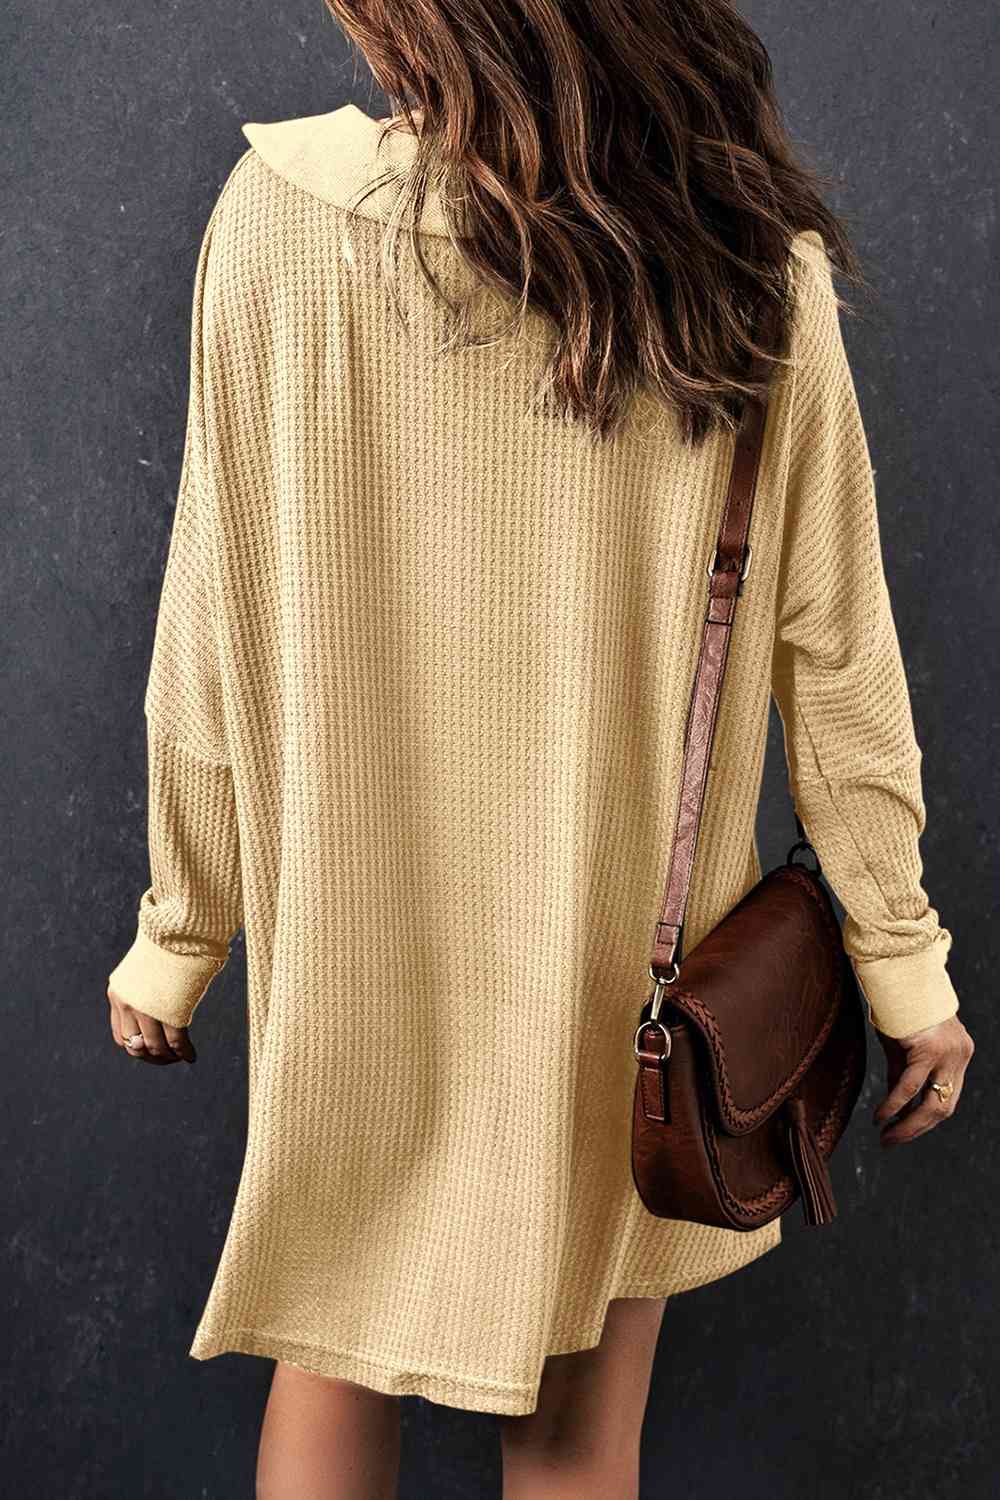 Waffle Knit Buttoned Long Sleeve Top with Breast Pocket - Tophatter Deals